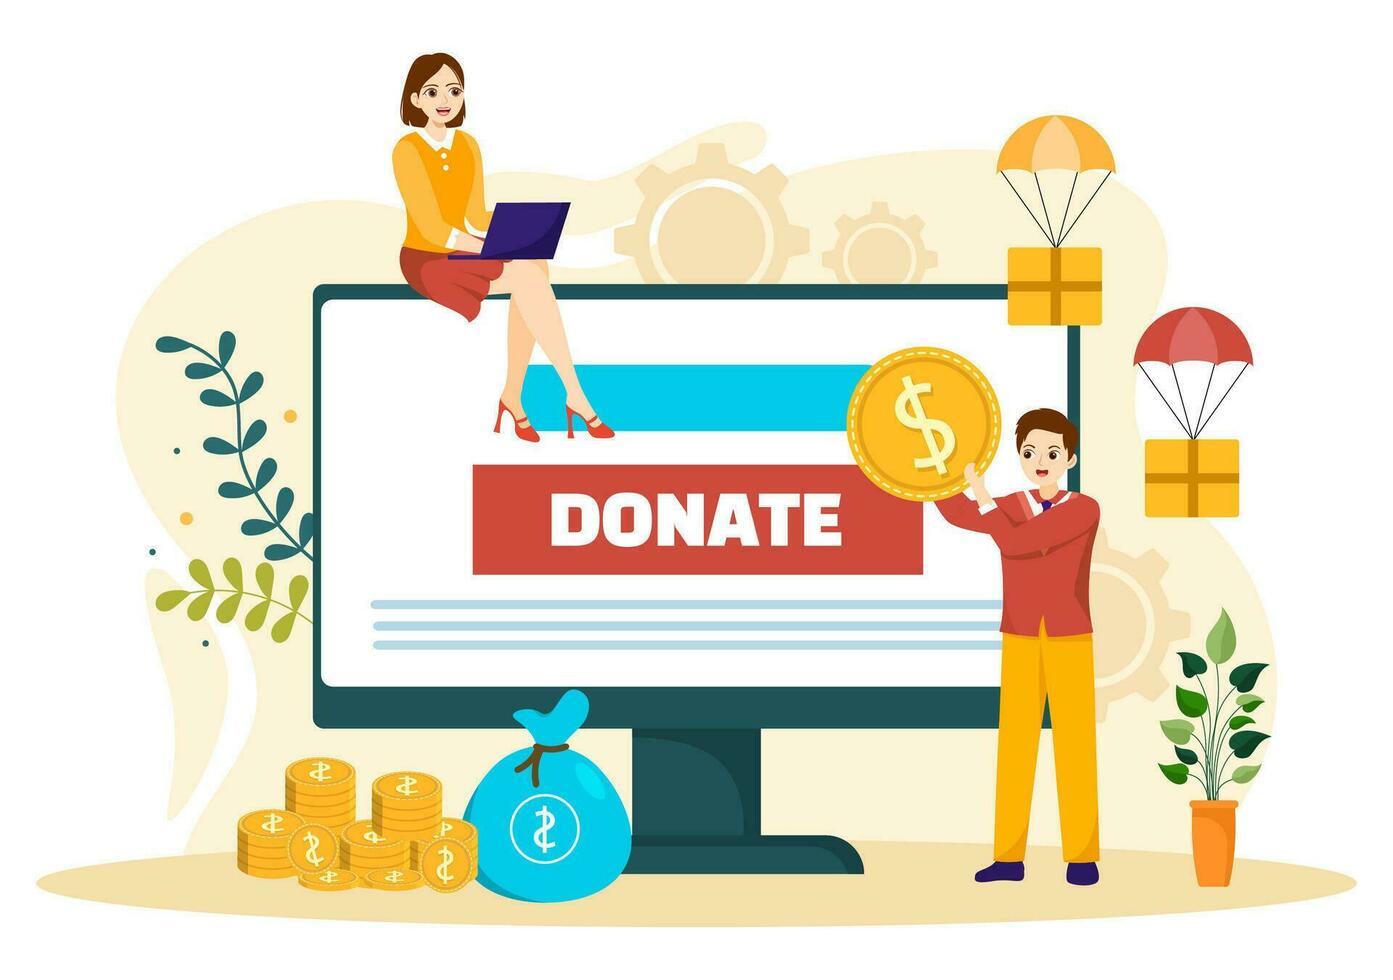 Fundraising Charity and Donation Vector Illustration with Volunteers Putting Coins or Money in Donation Box in Financial Support Cartoon Background